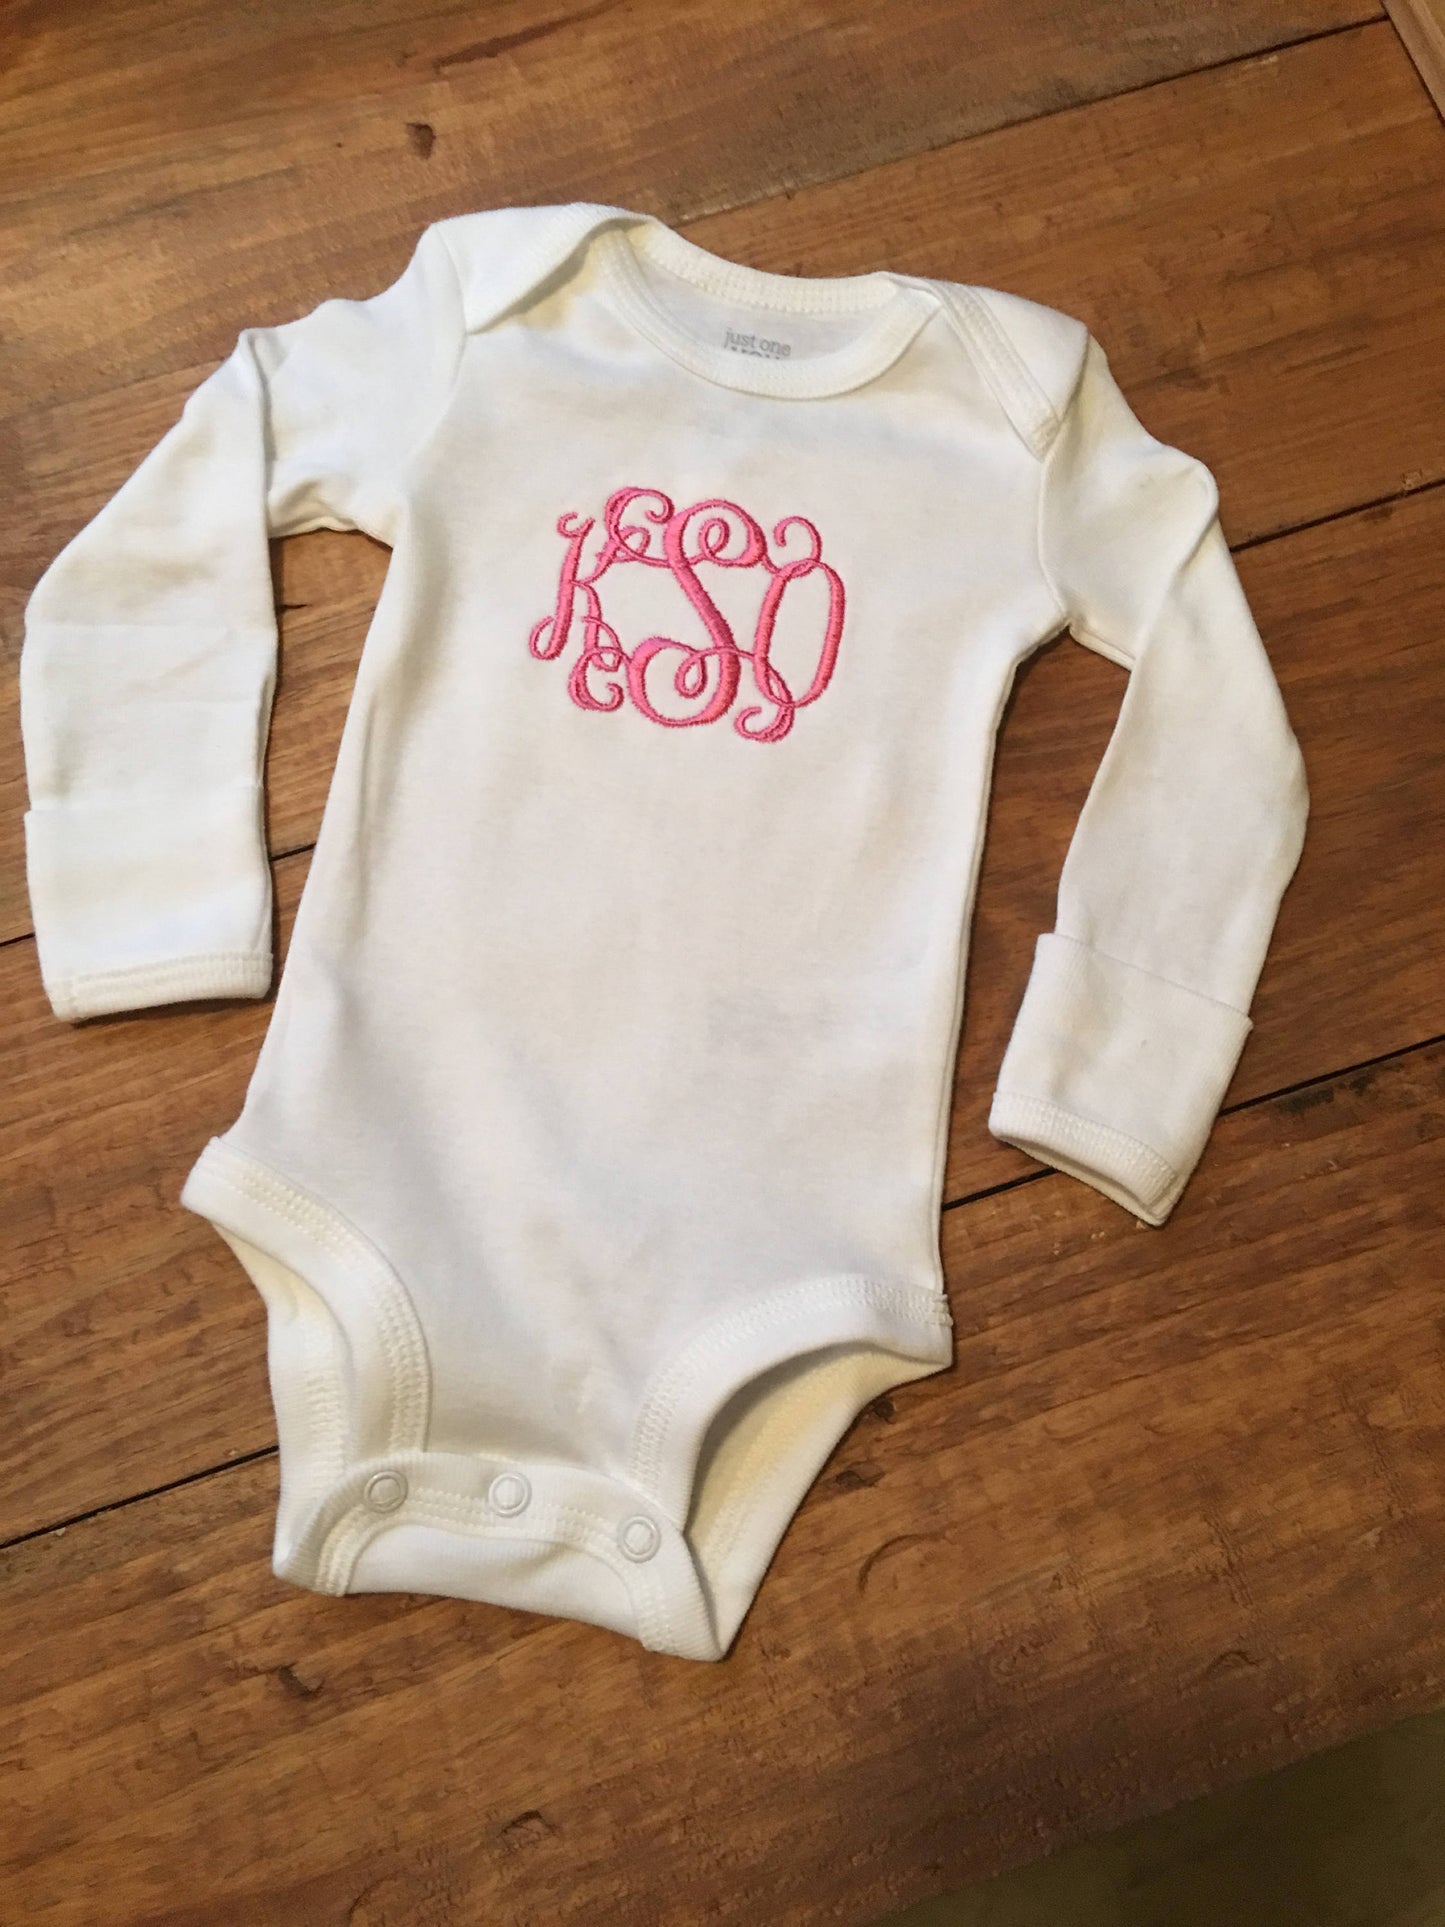 Baby girl coming home outfit set, baby shower gift set, newborn coming home outfit, hospital outfit, monogrammed one piece bodysuit